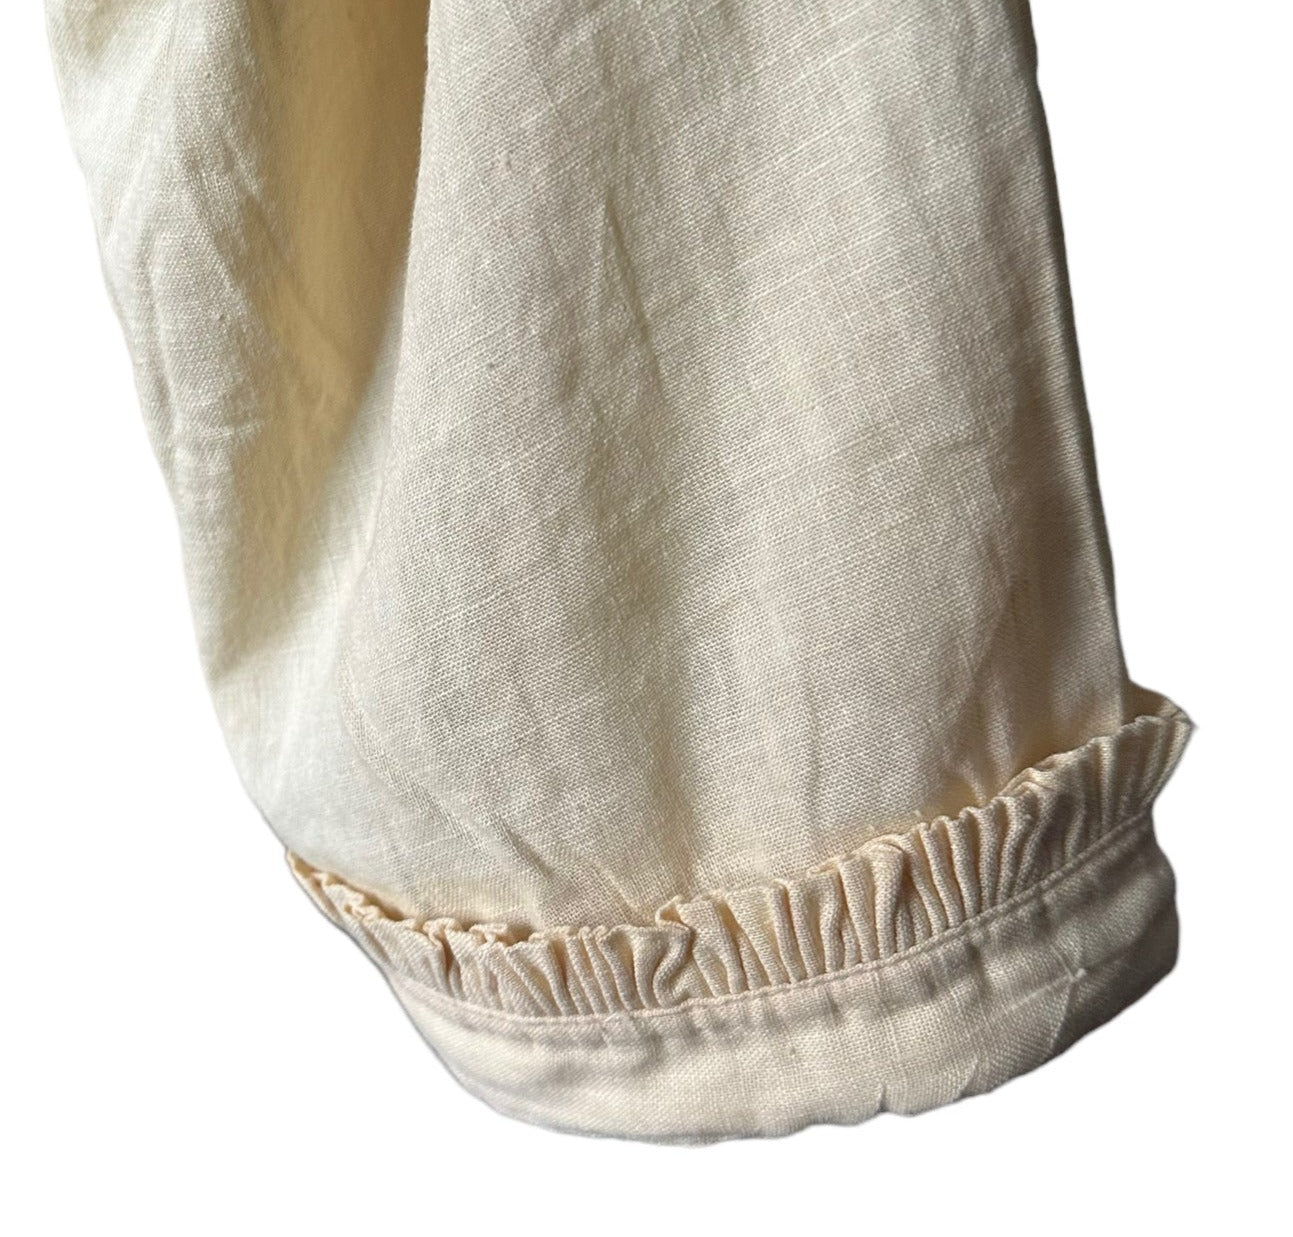 Ruffle cuff close up Early 1900s Antique Linen Blouse | Seattle Antique Clothing | Barn Owl True Vintage